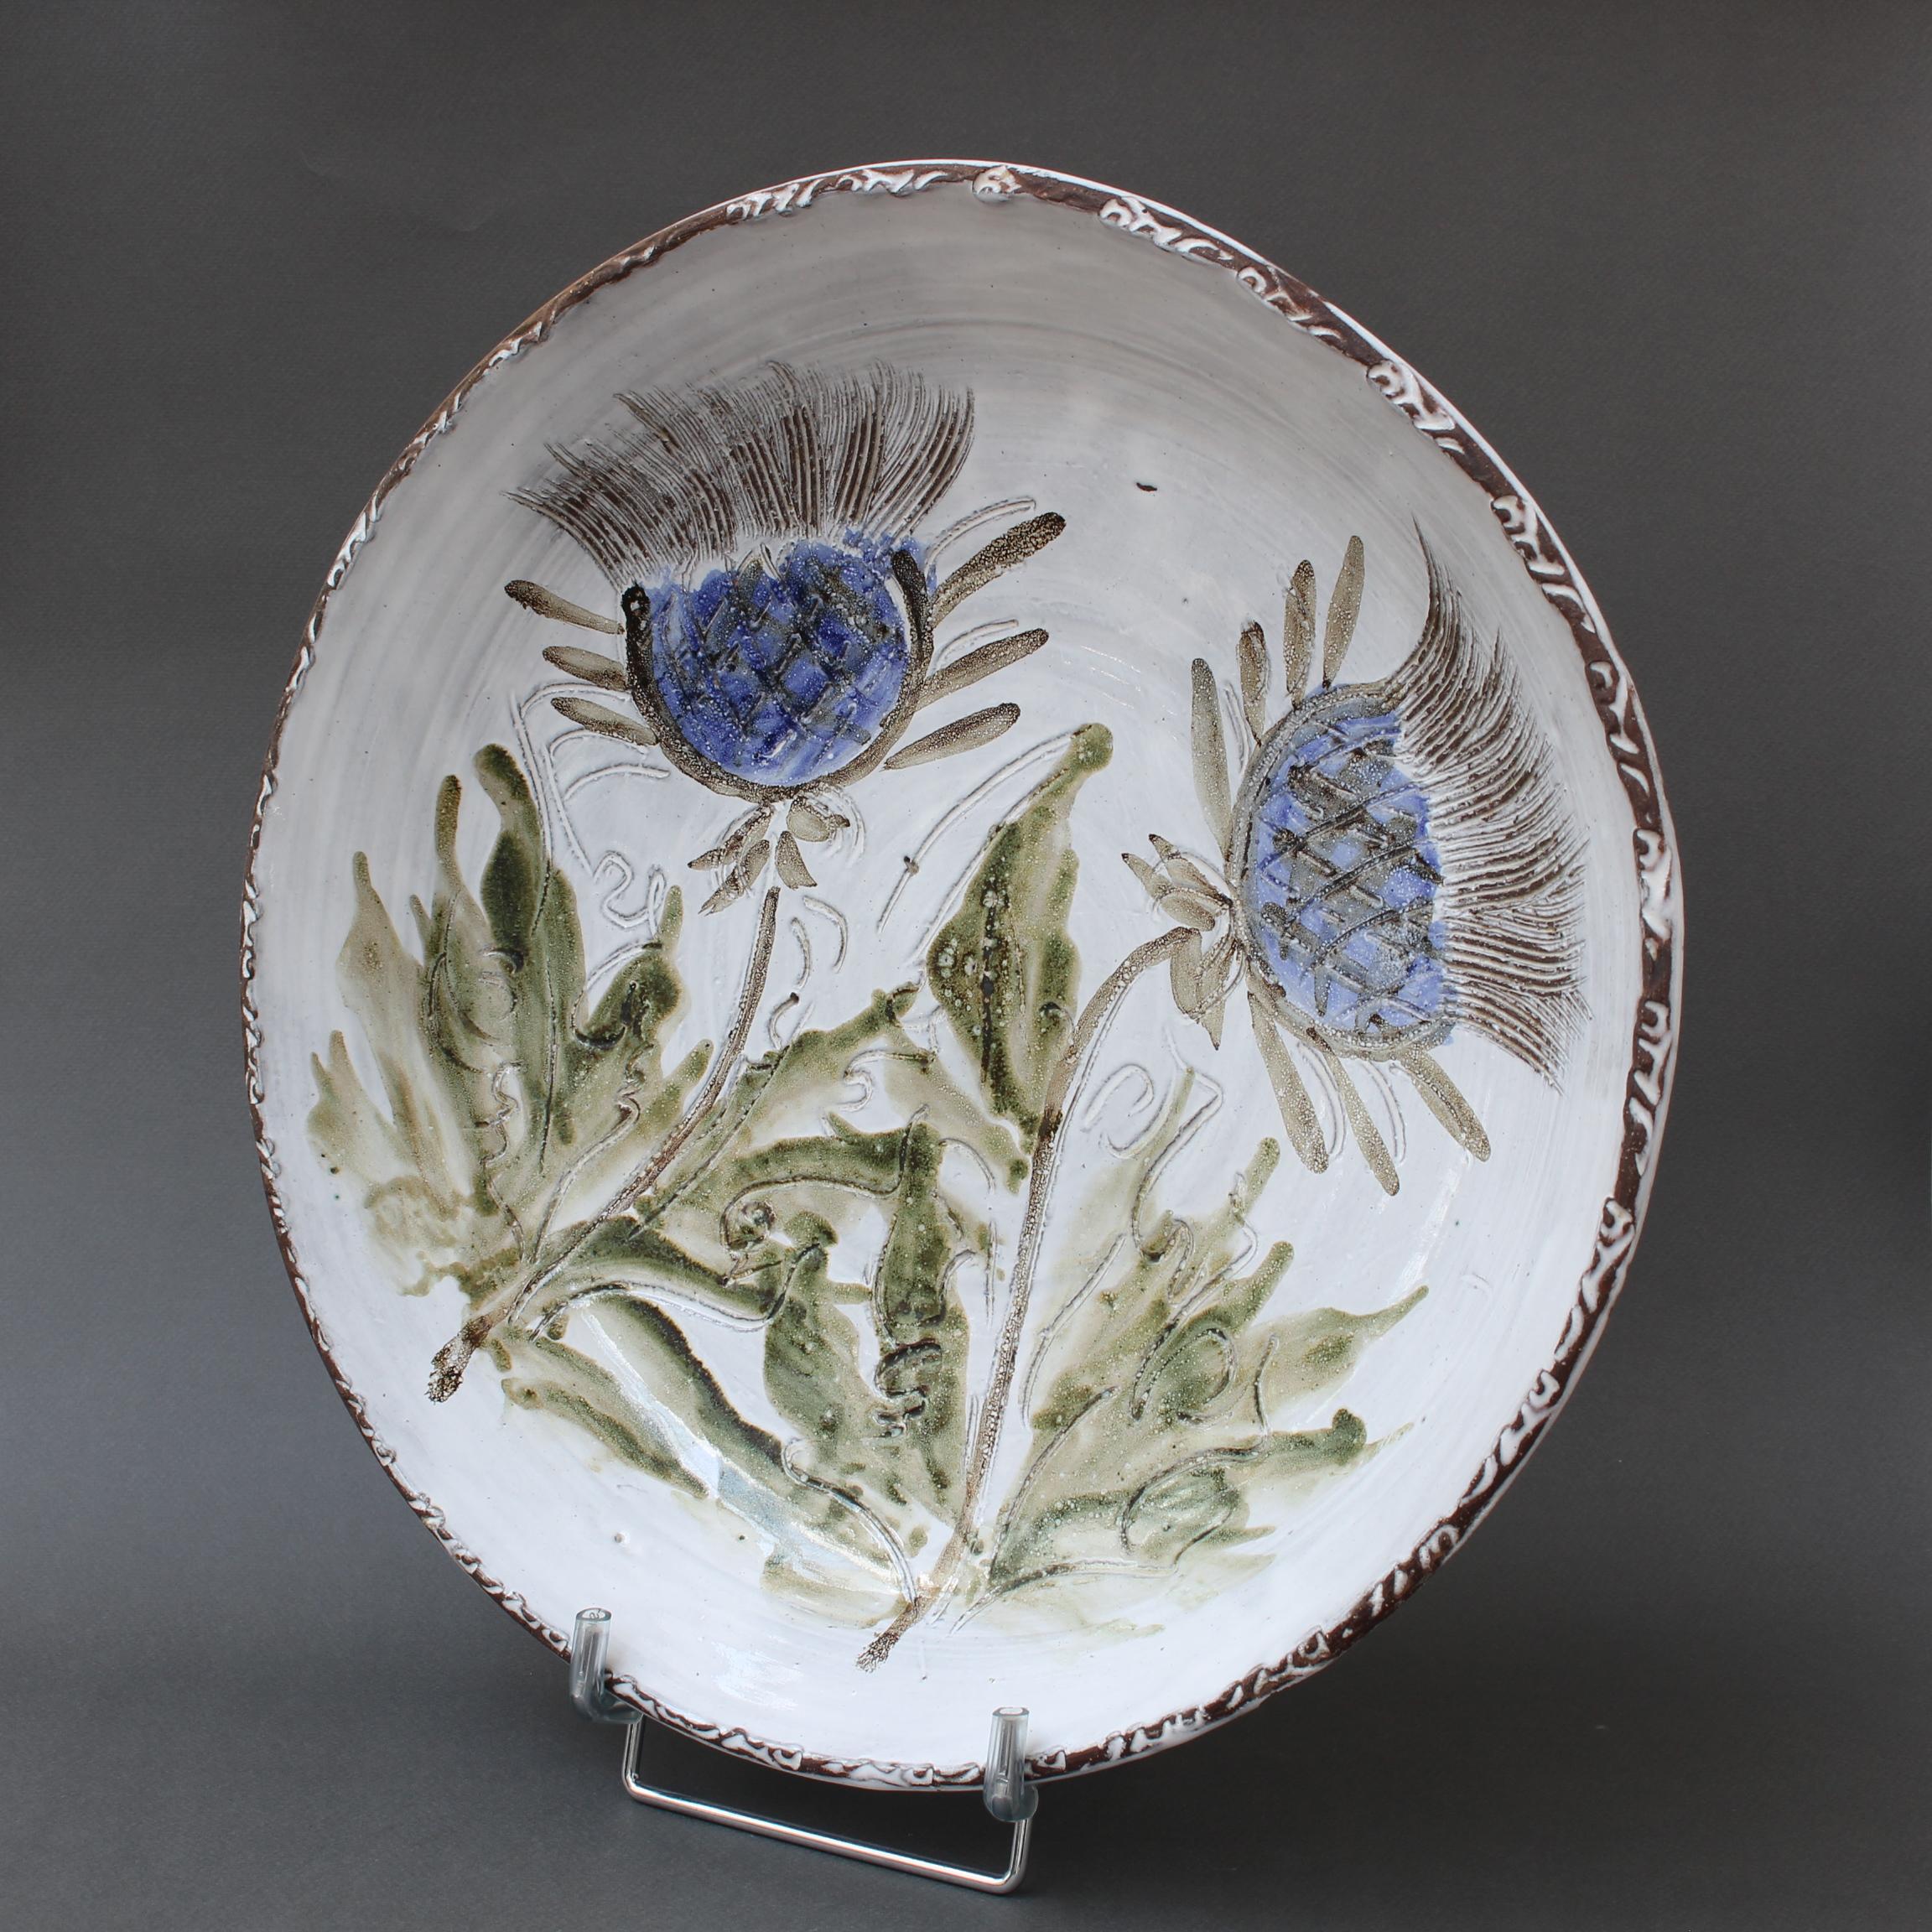 Large mid-century decorative platter (circa 1970s) by Albert Thiry. A creamy-white glaze with touches of blue-grey provides the background for a colourful thistle motif in the centre recess. The rim is an earthy brown with incised shapes in white.